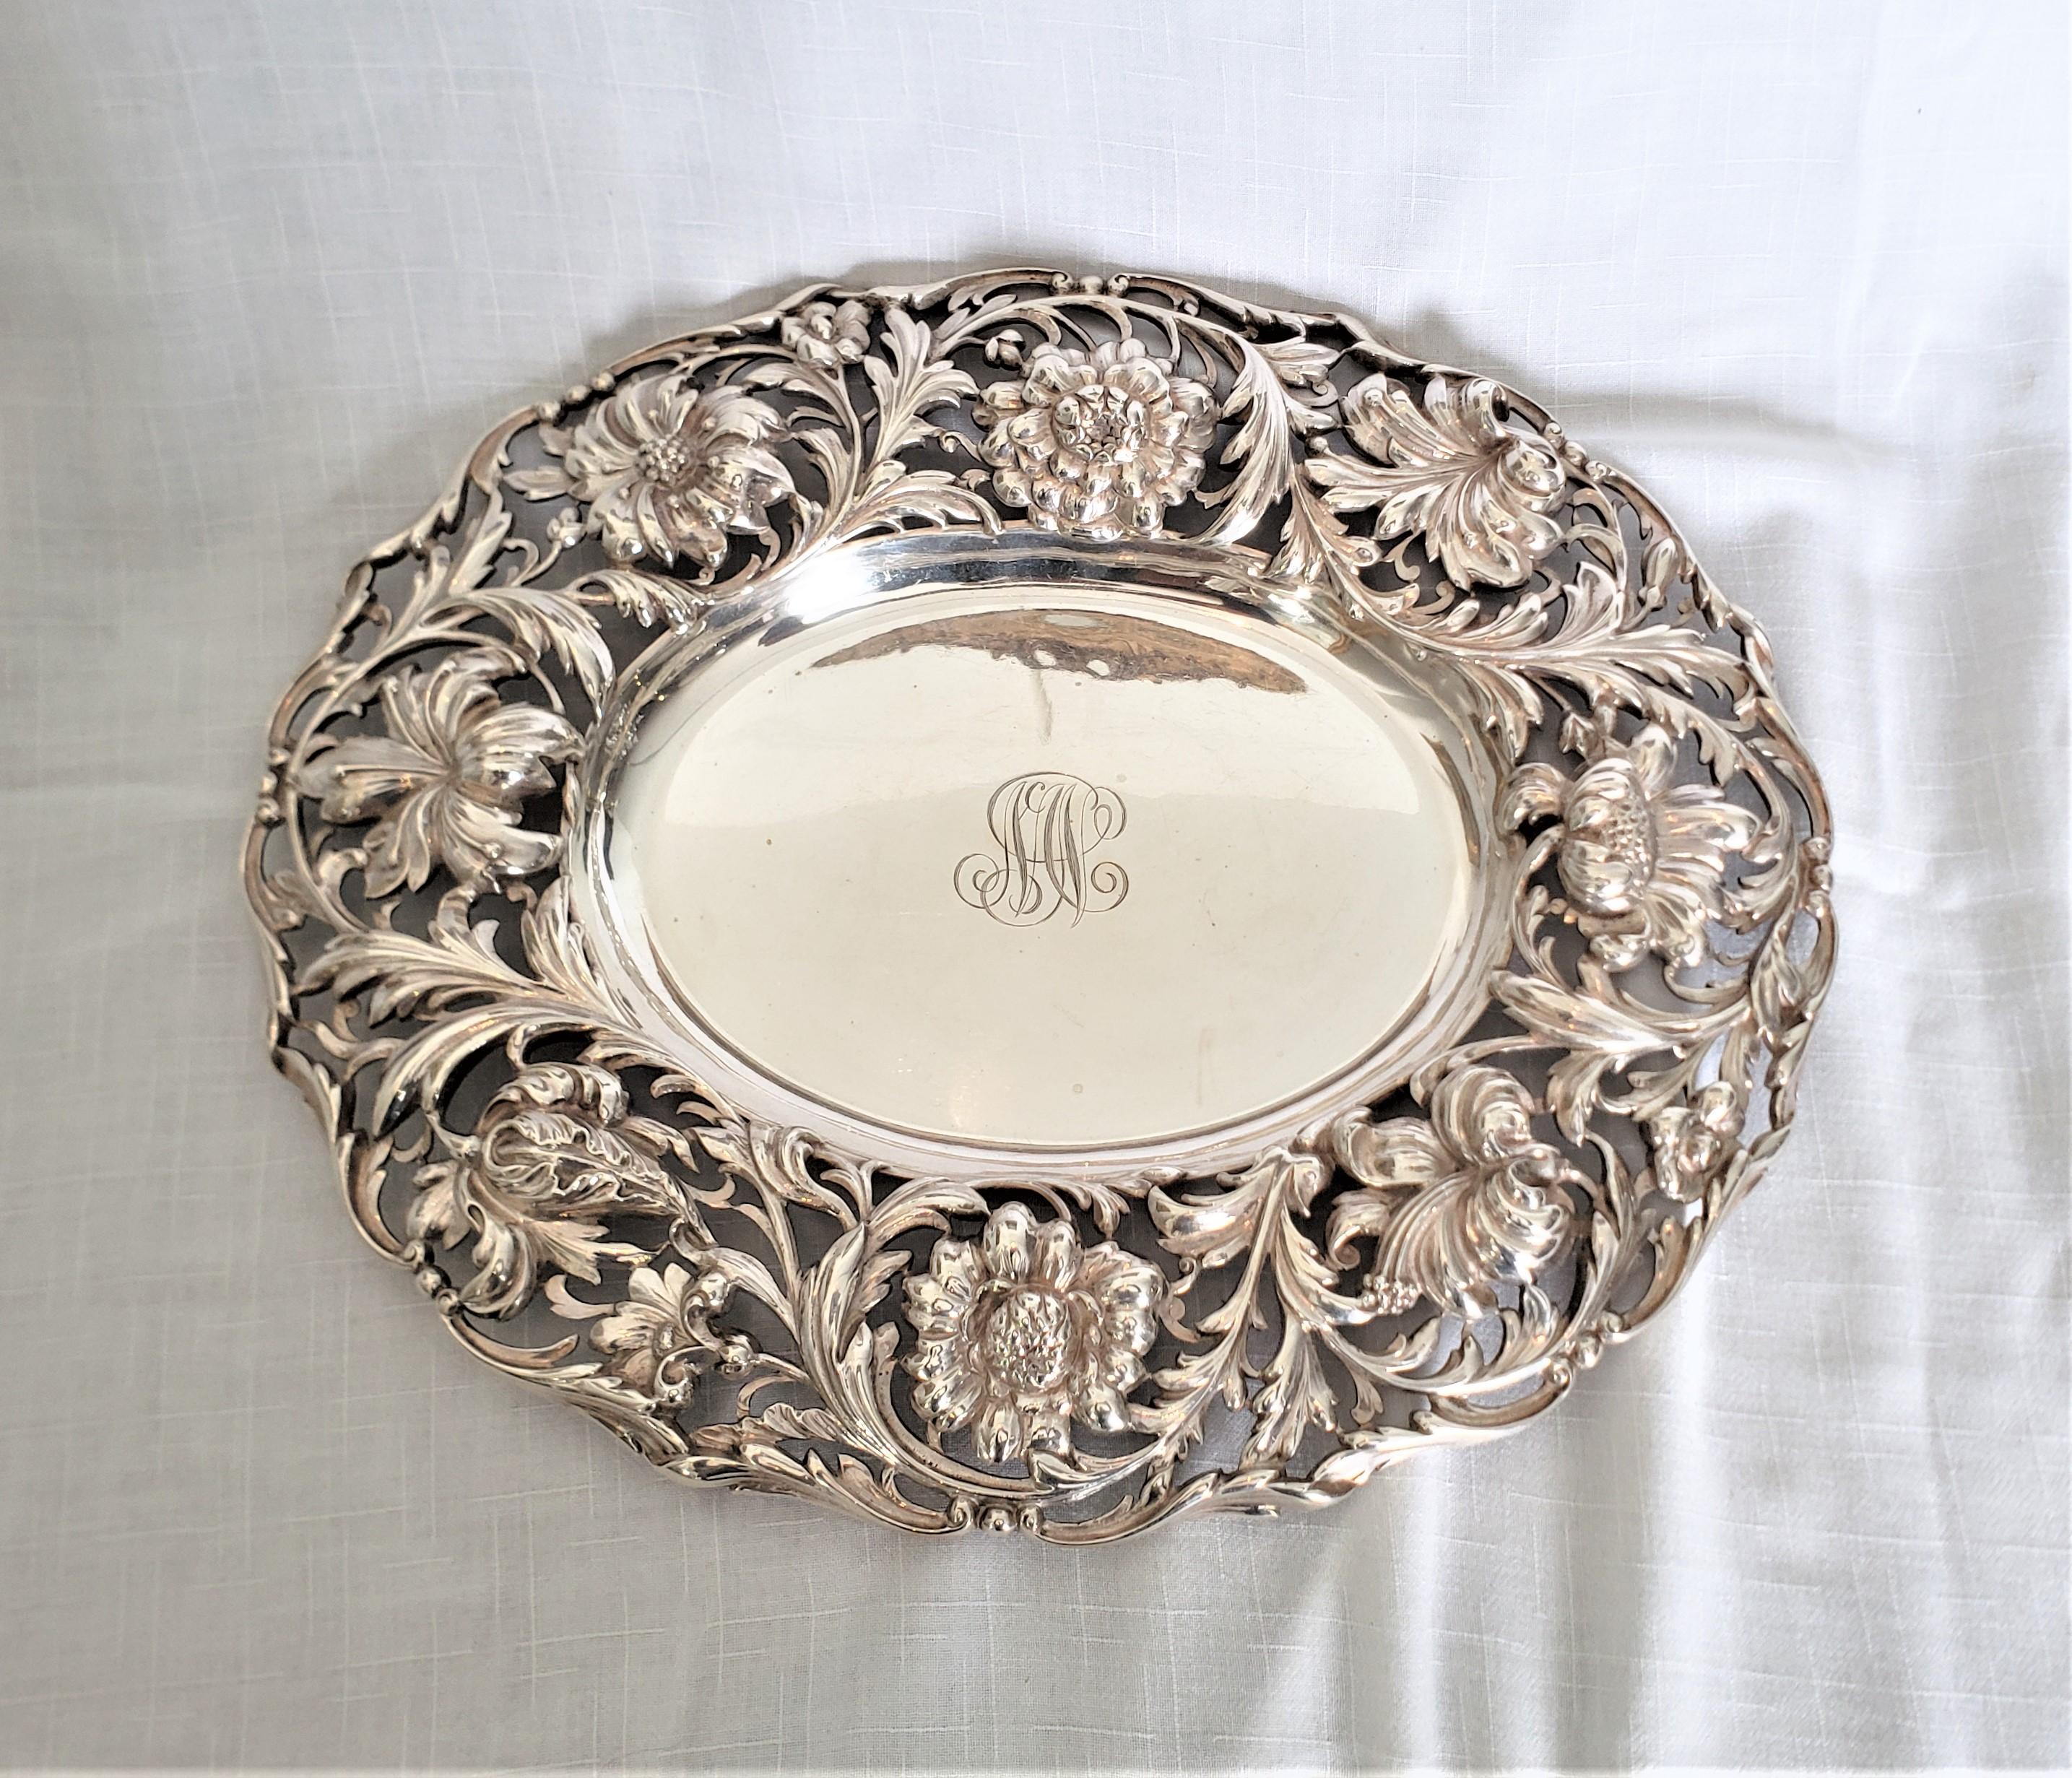 This antique sterling silver serving dish or tray was made by the renowned Tiffany and Co. of the United States in approximately 1860 in the period Victorian style. This oval sterling silver tray is monogrammed and features a large rim exquisitely